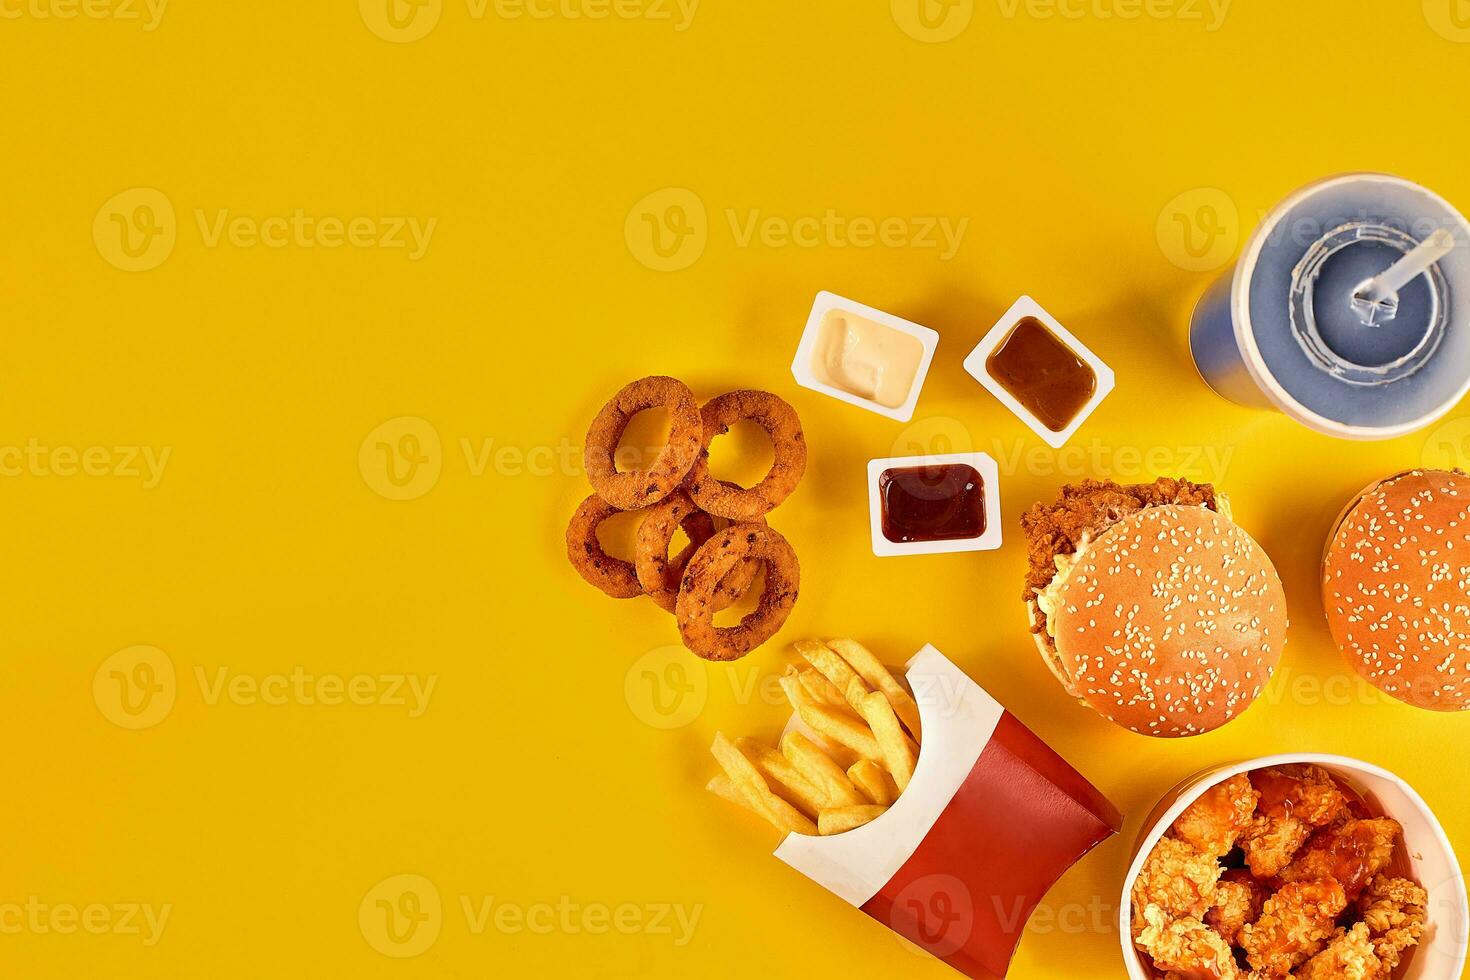 Fast food dish top view. French fries, hamburger, mayonnaise and ketchup sauces on yellow background. photo